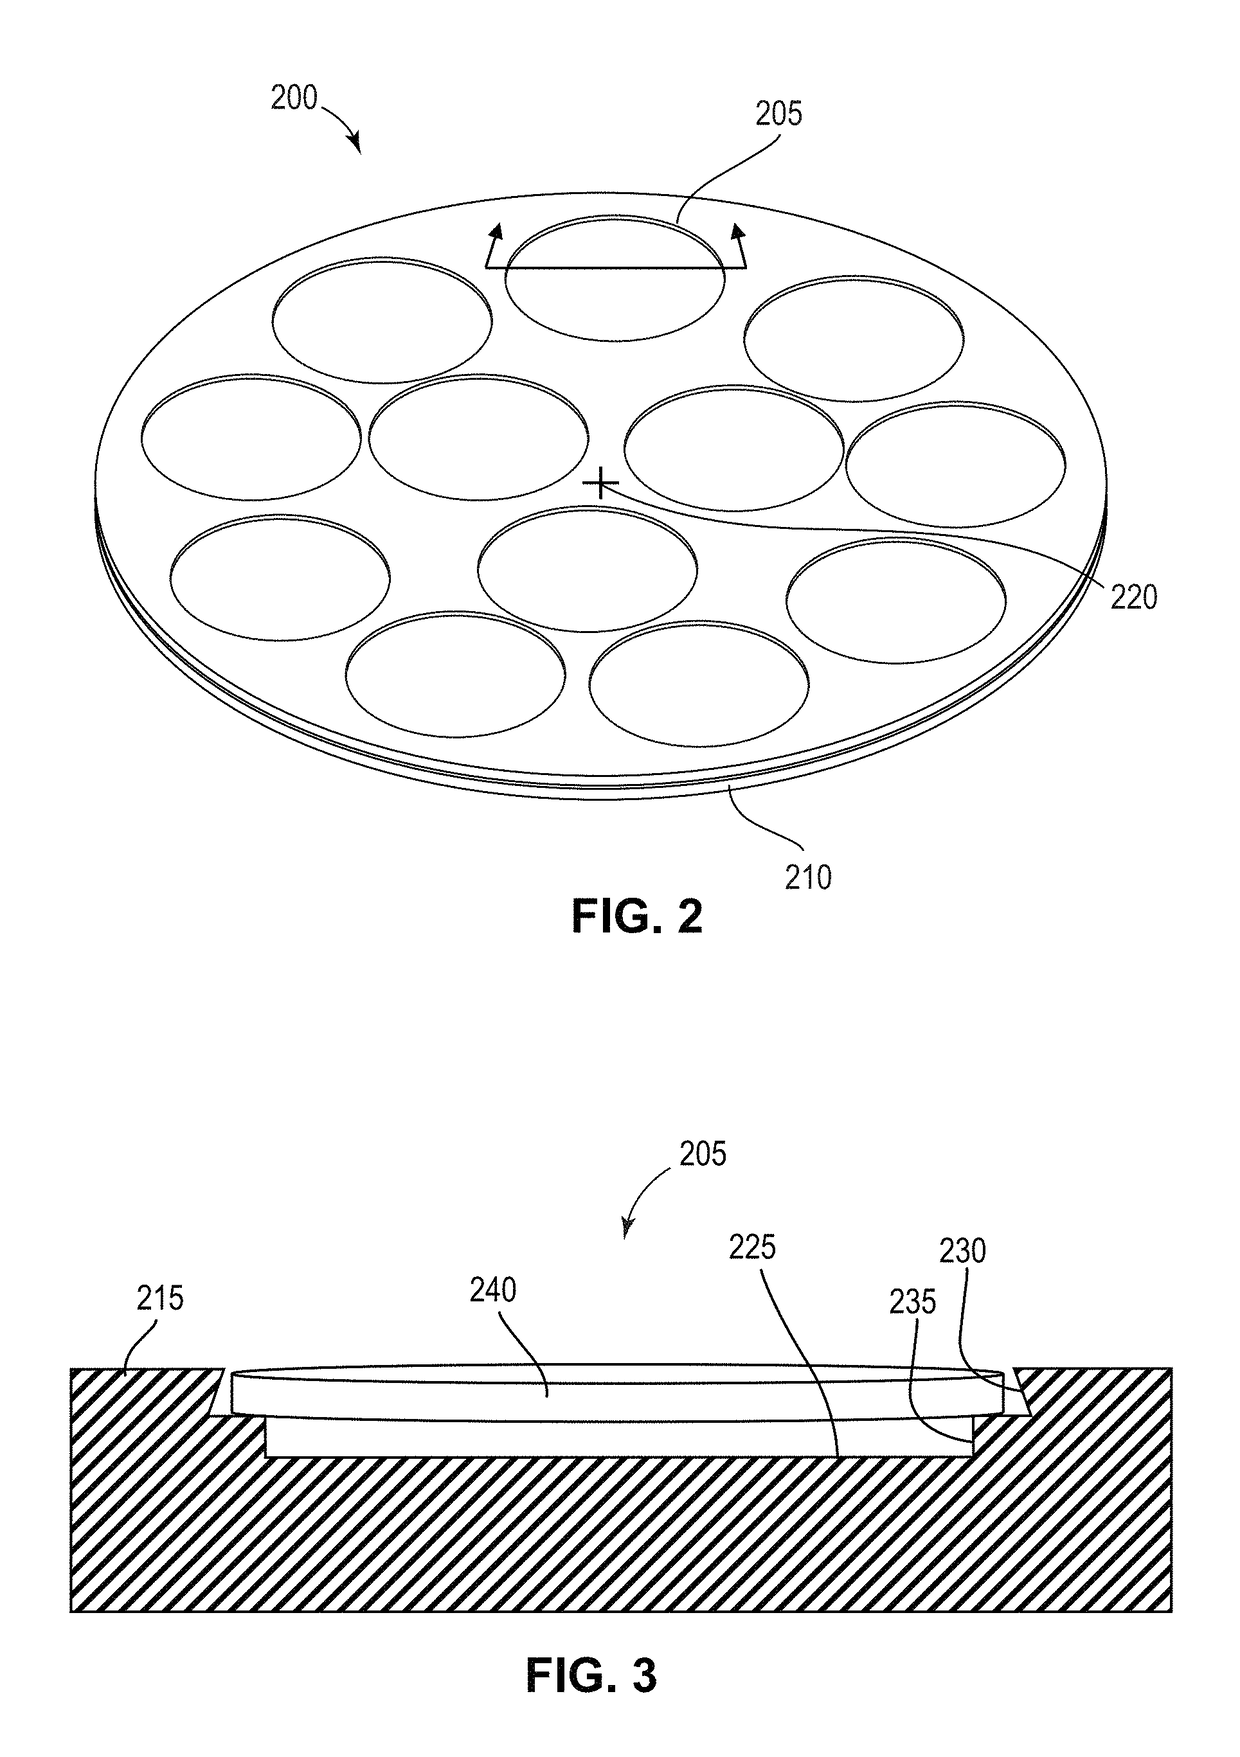 Wafer carrier having thermal cover for chemical vapor deposition systems